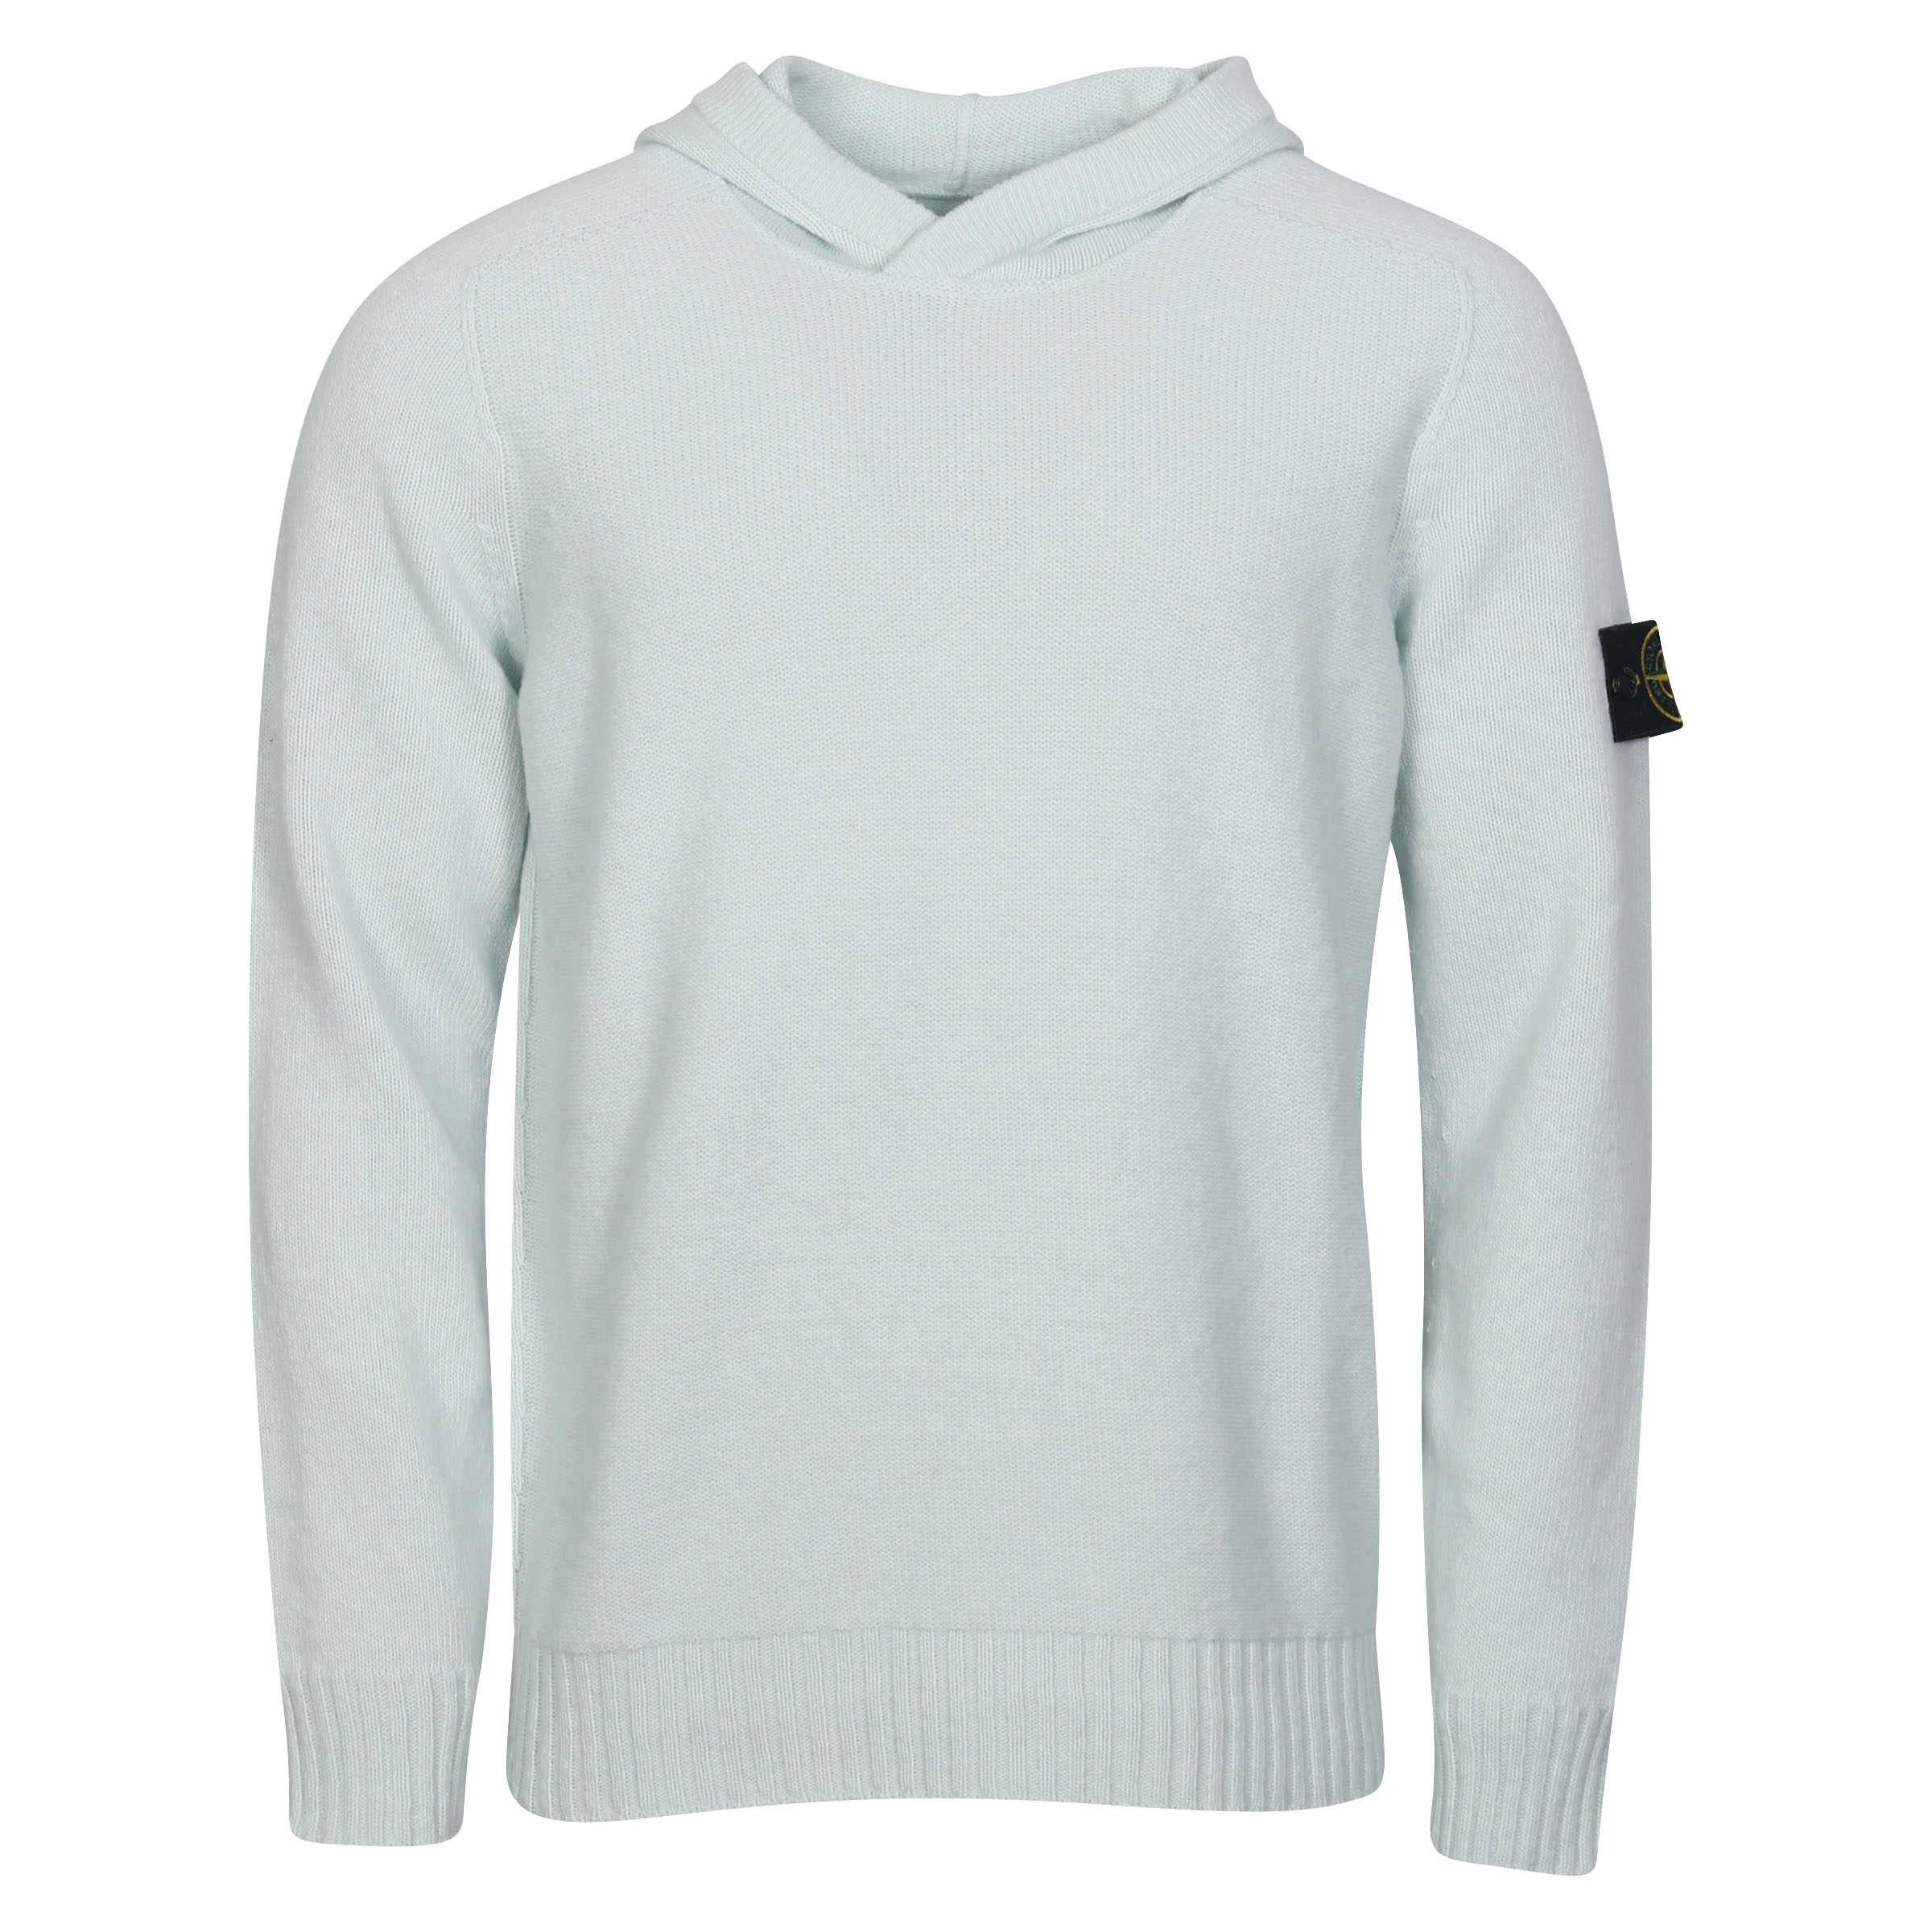 Stone Island Knit Hoodie in Light Turquoise